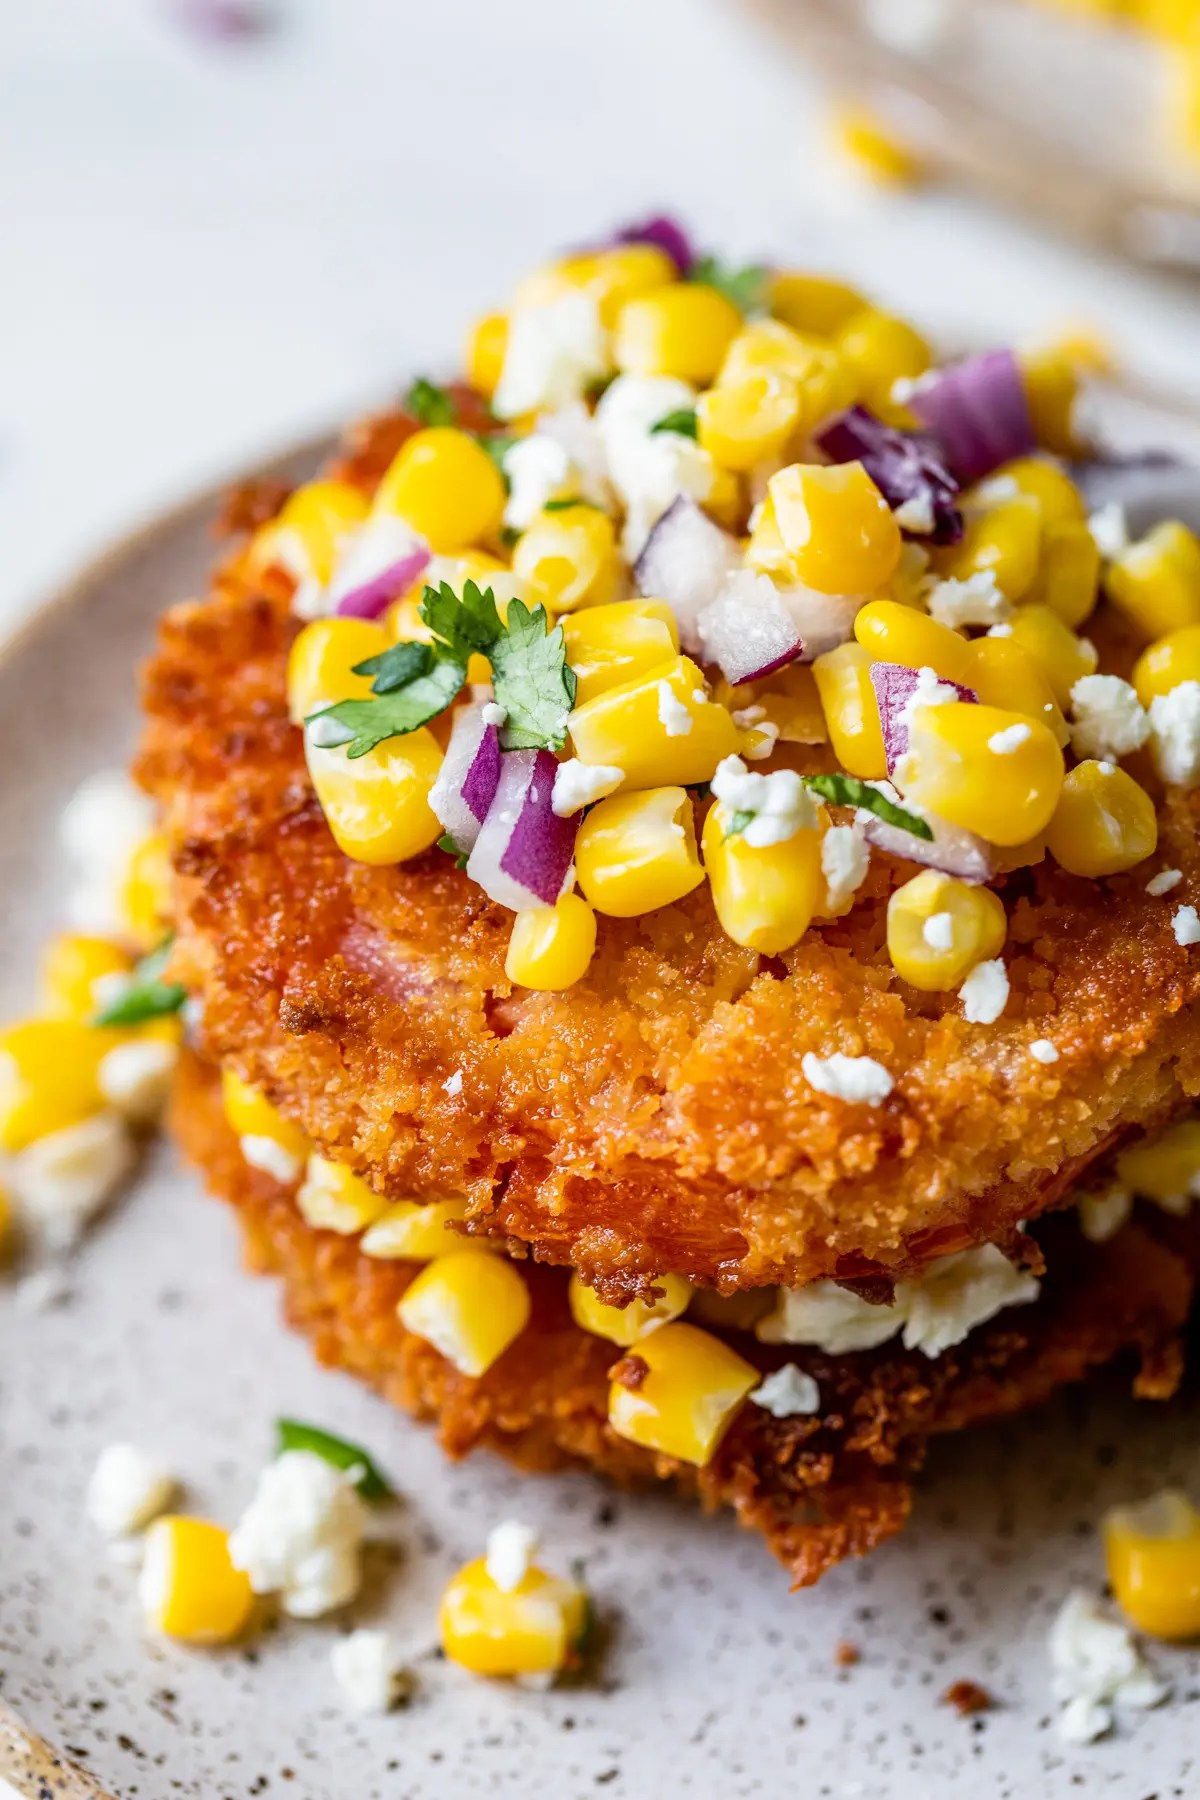 fried tomato slices topped with corn